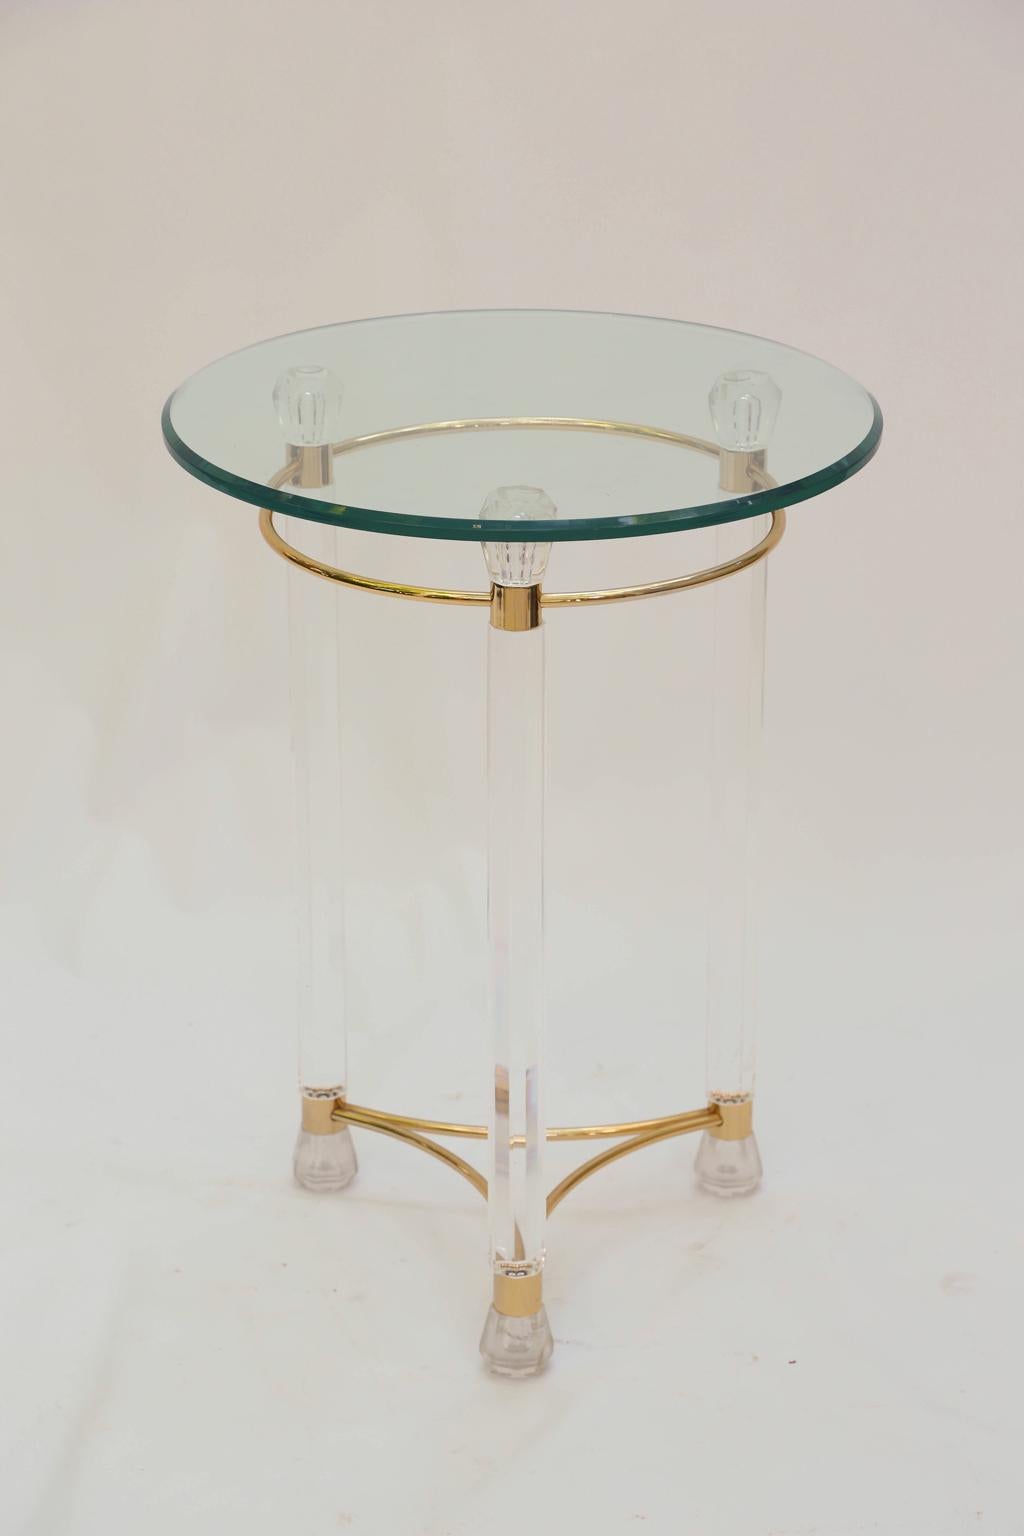 Acrylic Lucite End Table Round Glass Top